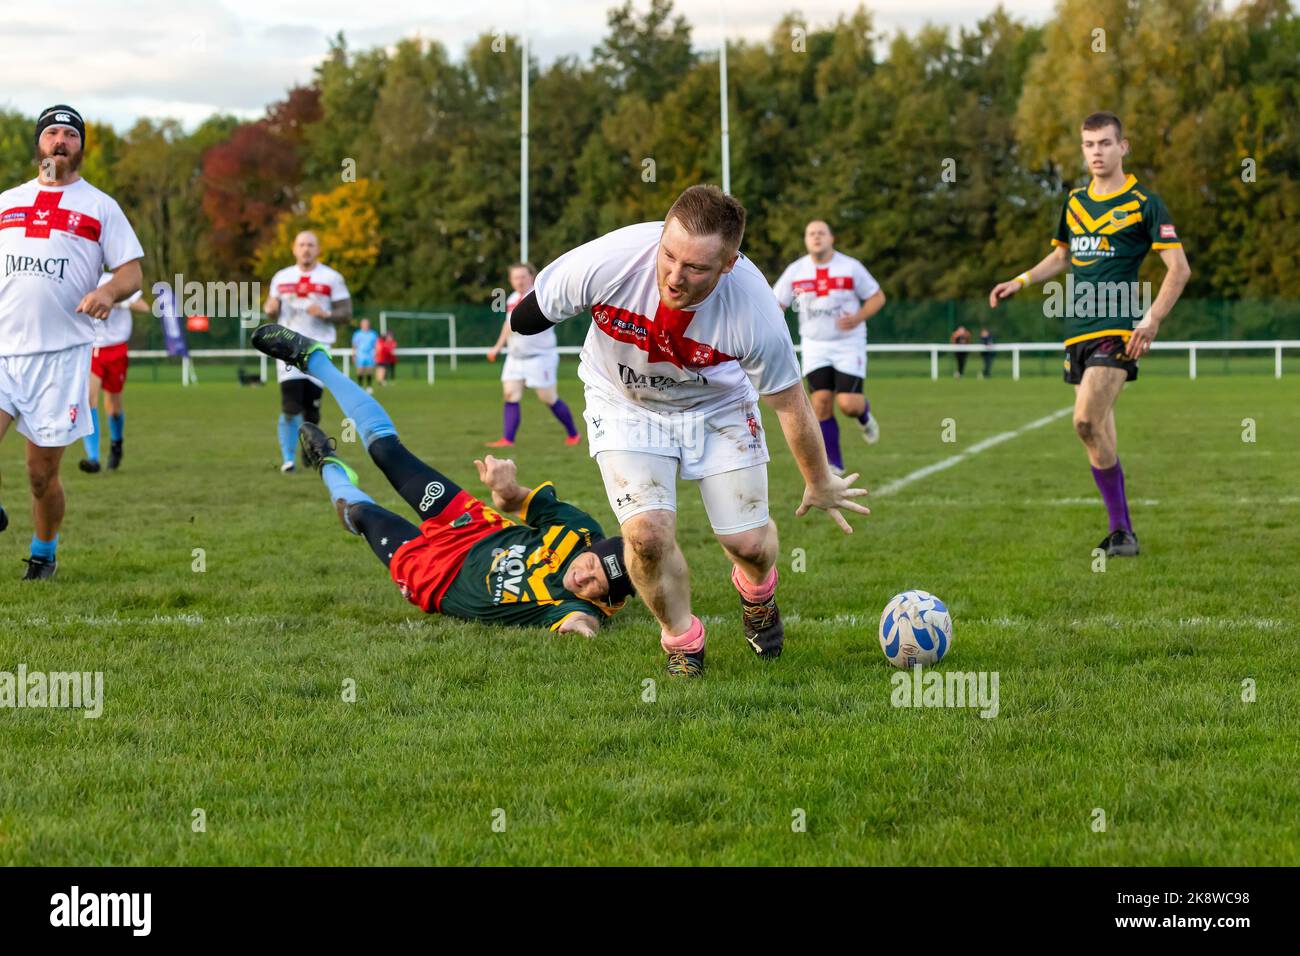 Physical Disability Rugby League World Cup at Victoria Park. England played Australia and were emphatic winners by 58 points to 6. Stock Photo